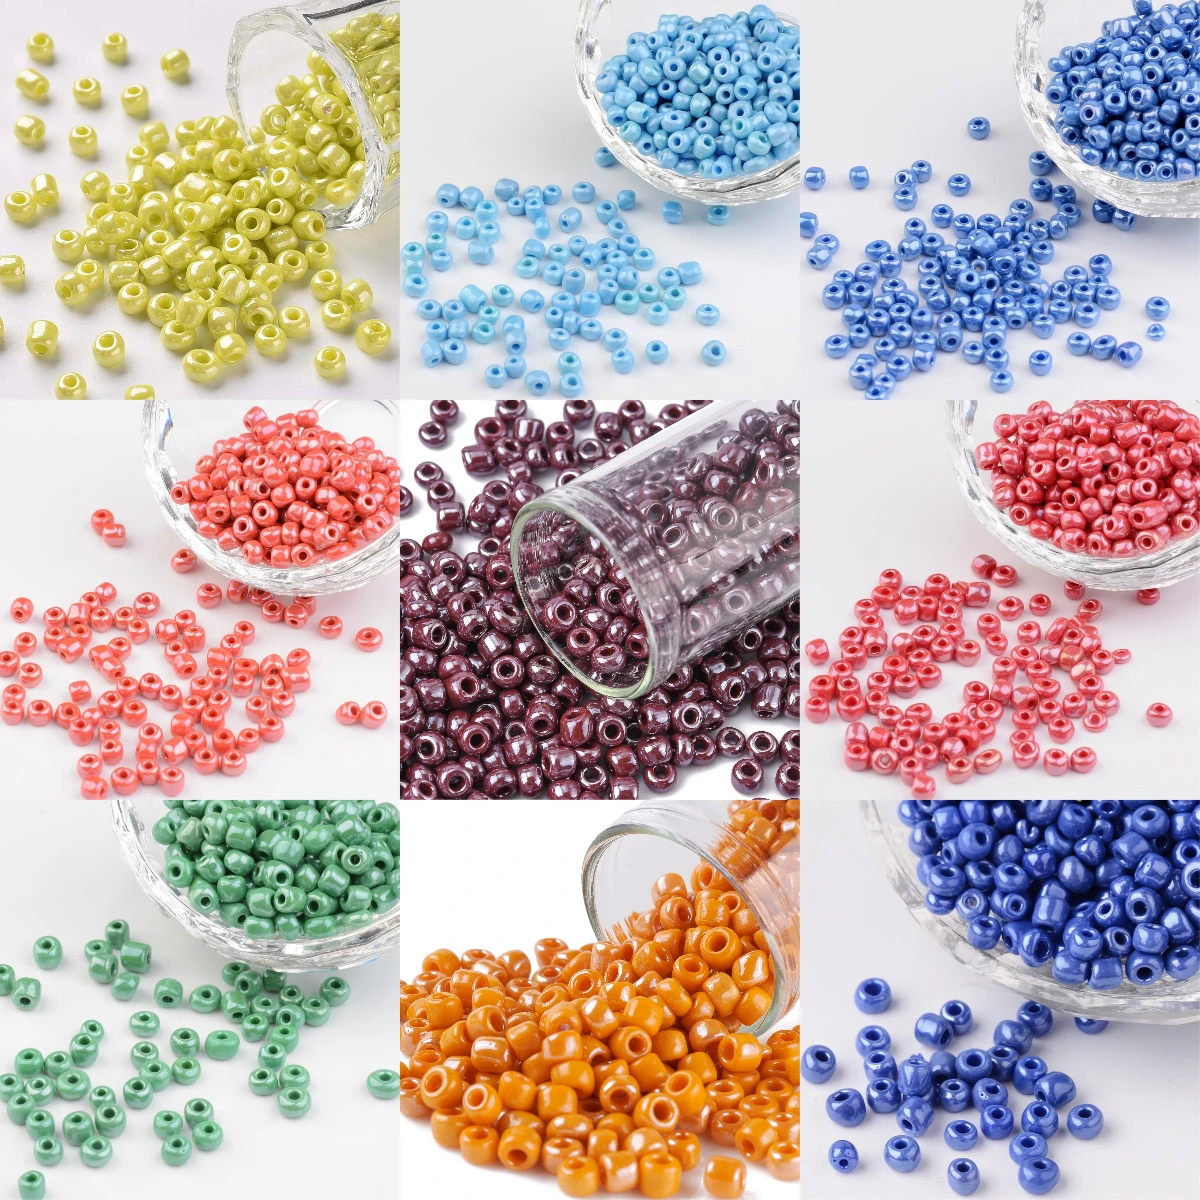 Multi-Color Sea Blue seed beads 50g 4mm glass beads opaque